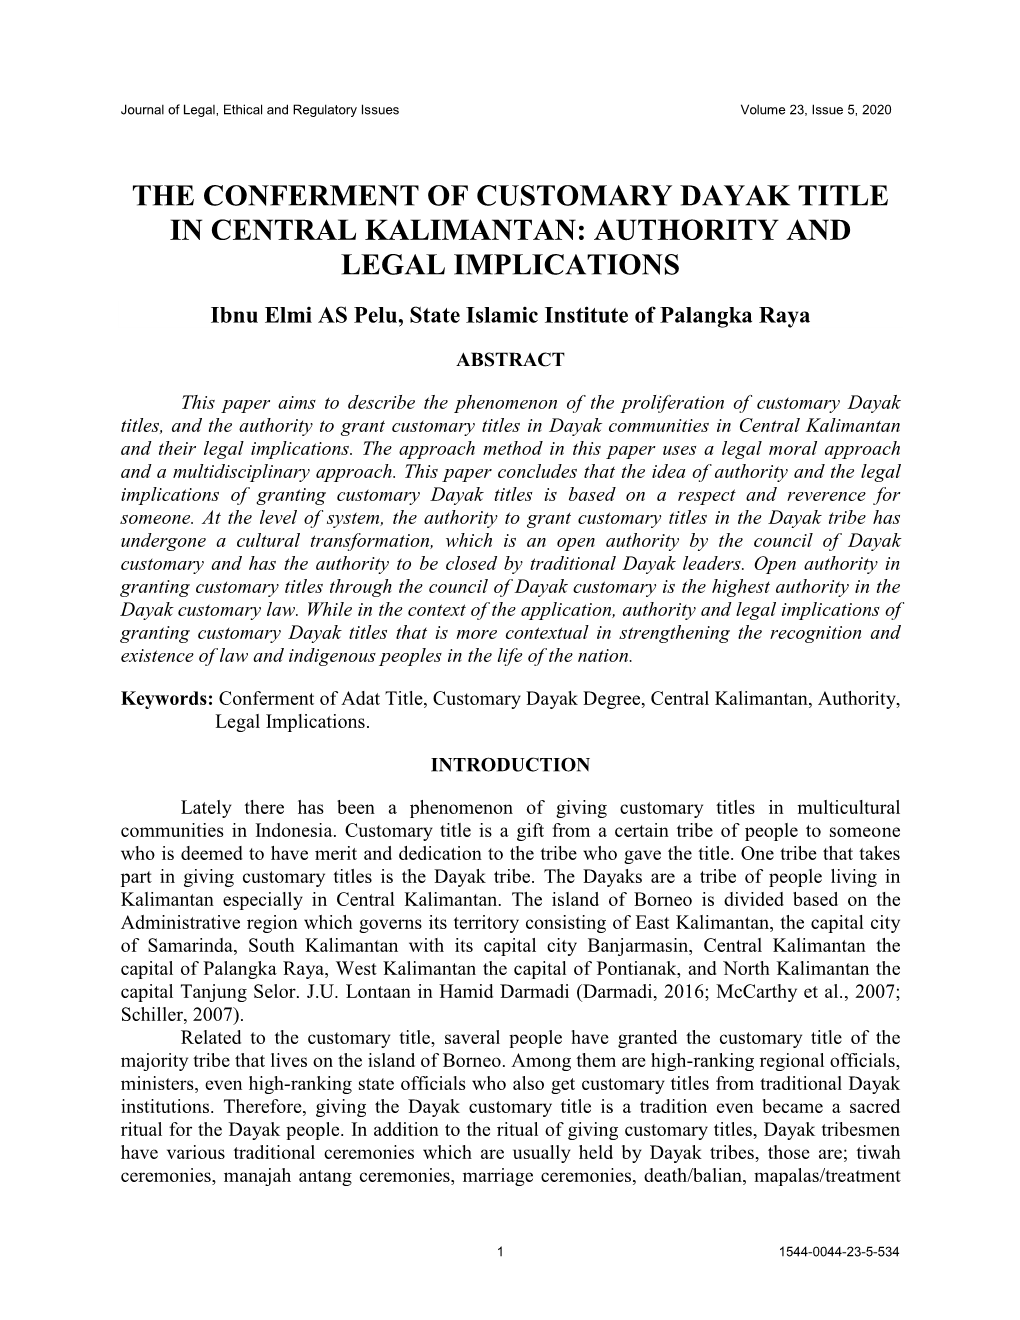 The Conferment of Customary Dayak Title in Central Kalimantan: Authority and Legal Implications